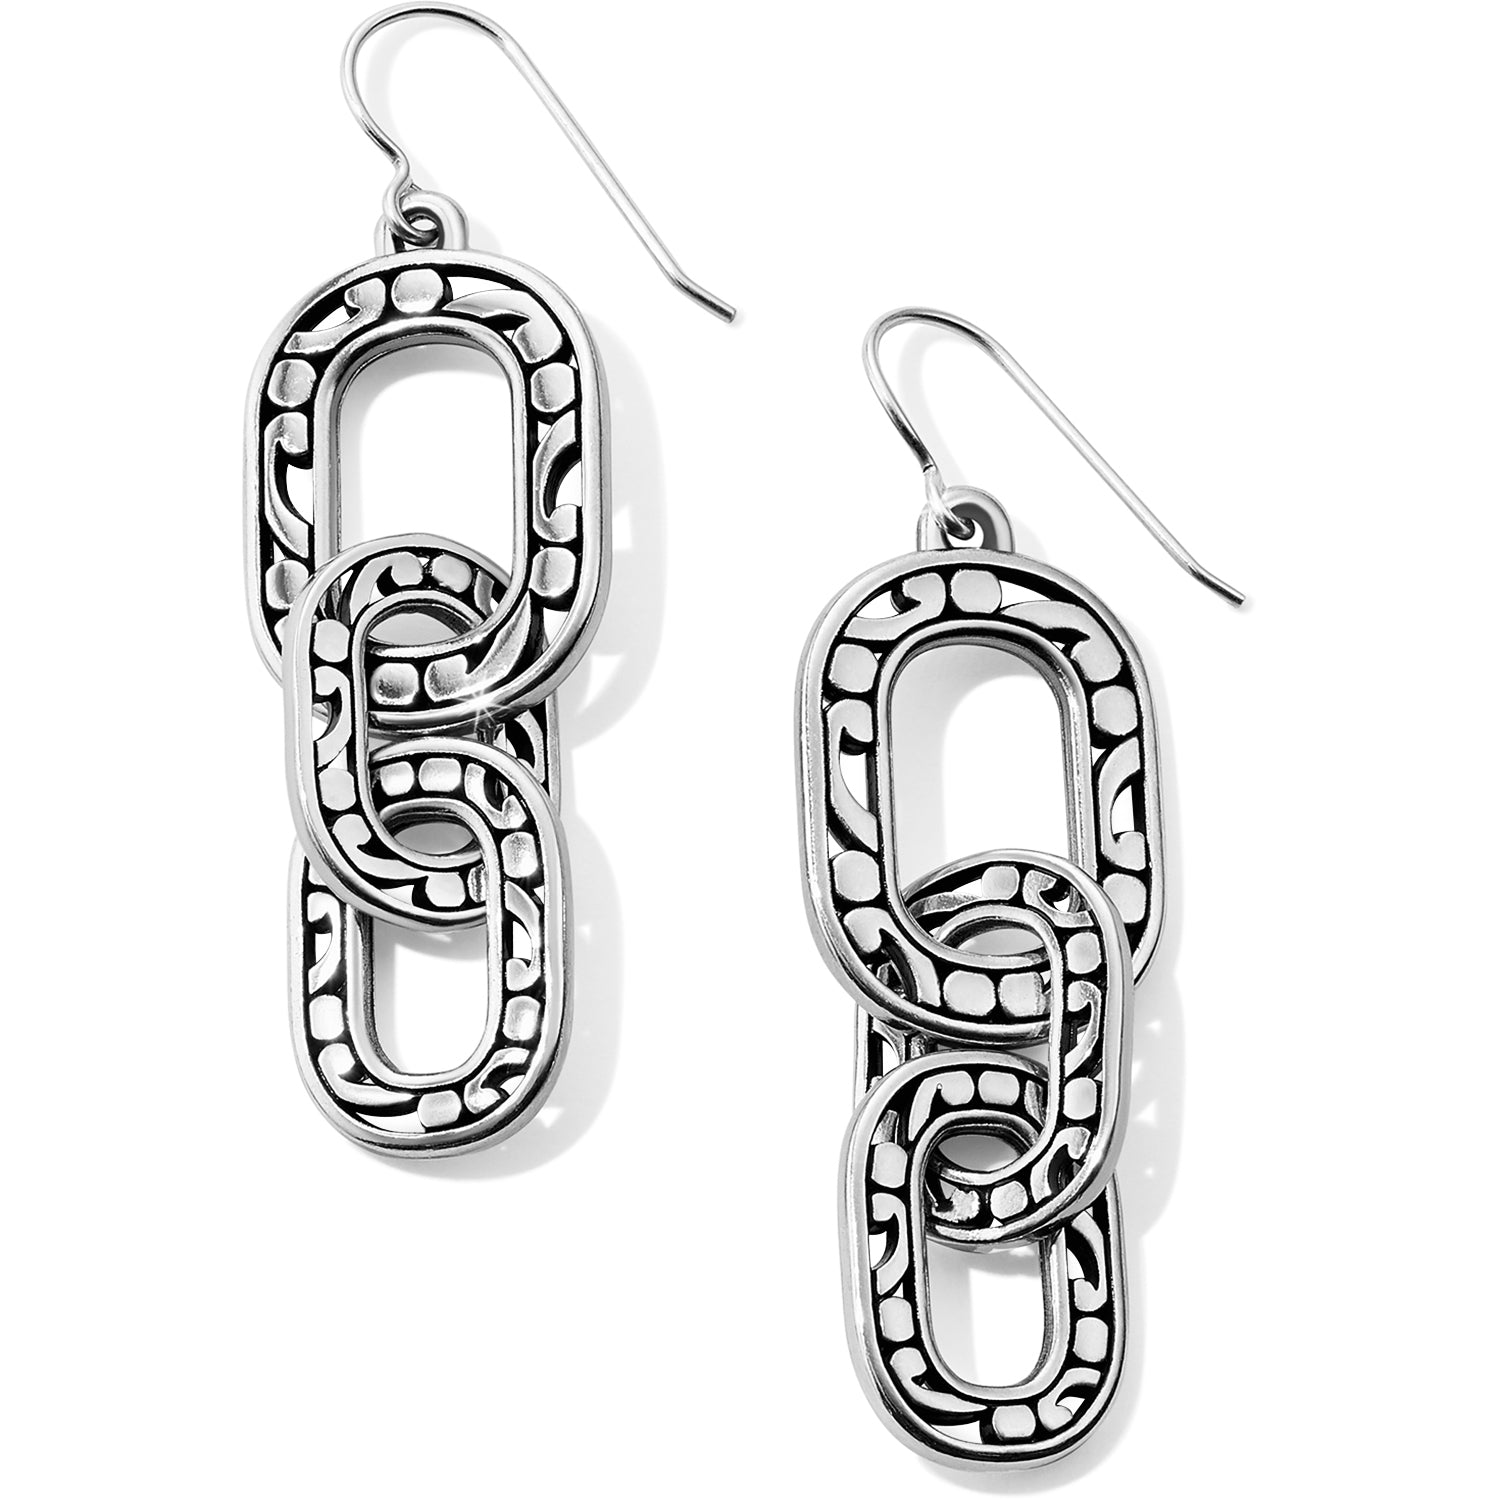 Contempo Linx French Wire Earrings